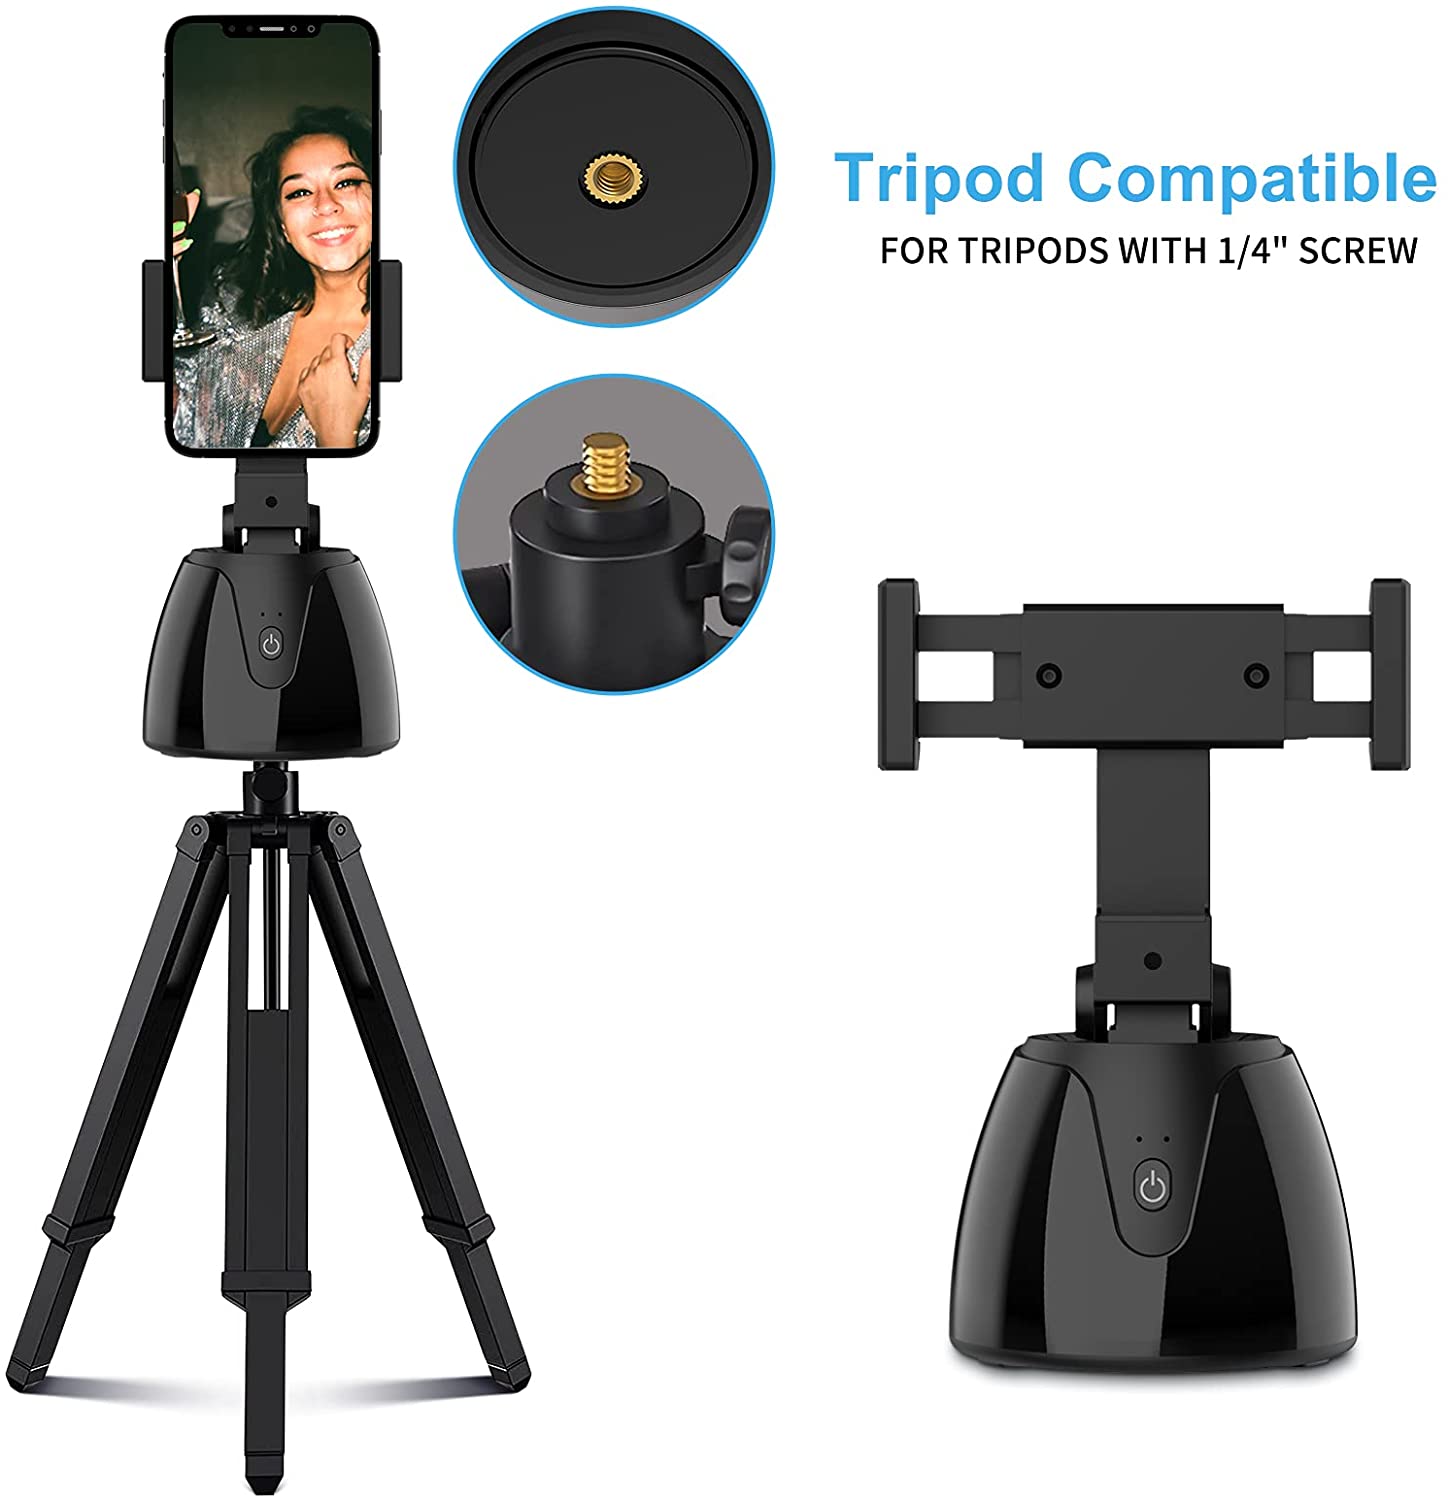 360° Automatic Tracking Mobile Phone Stand Tracking Face Live Assistance